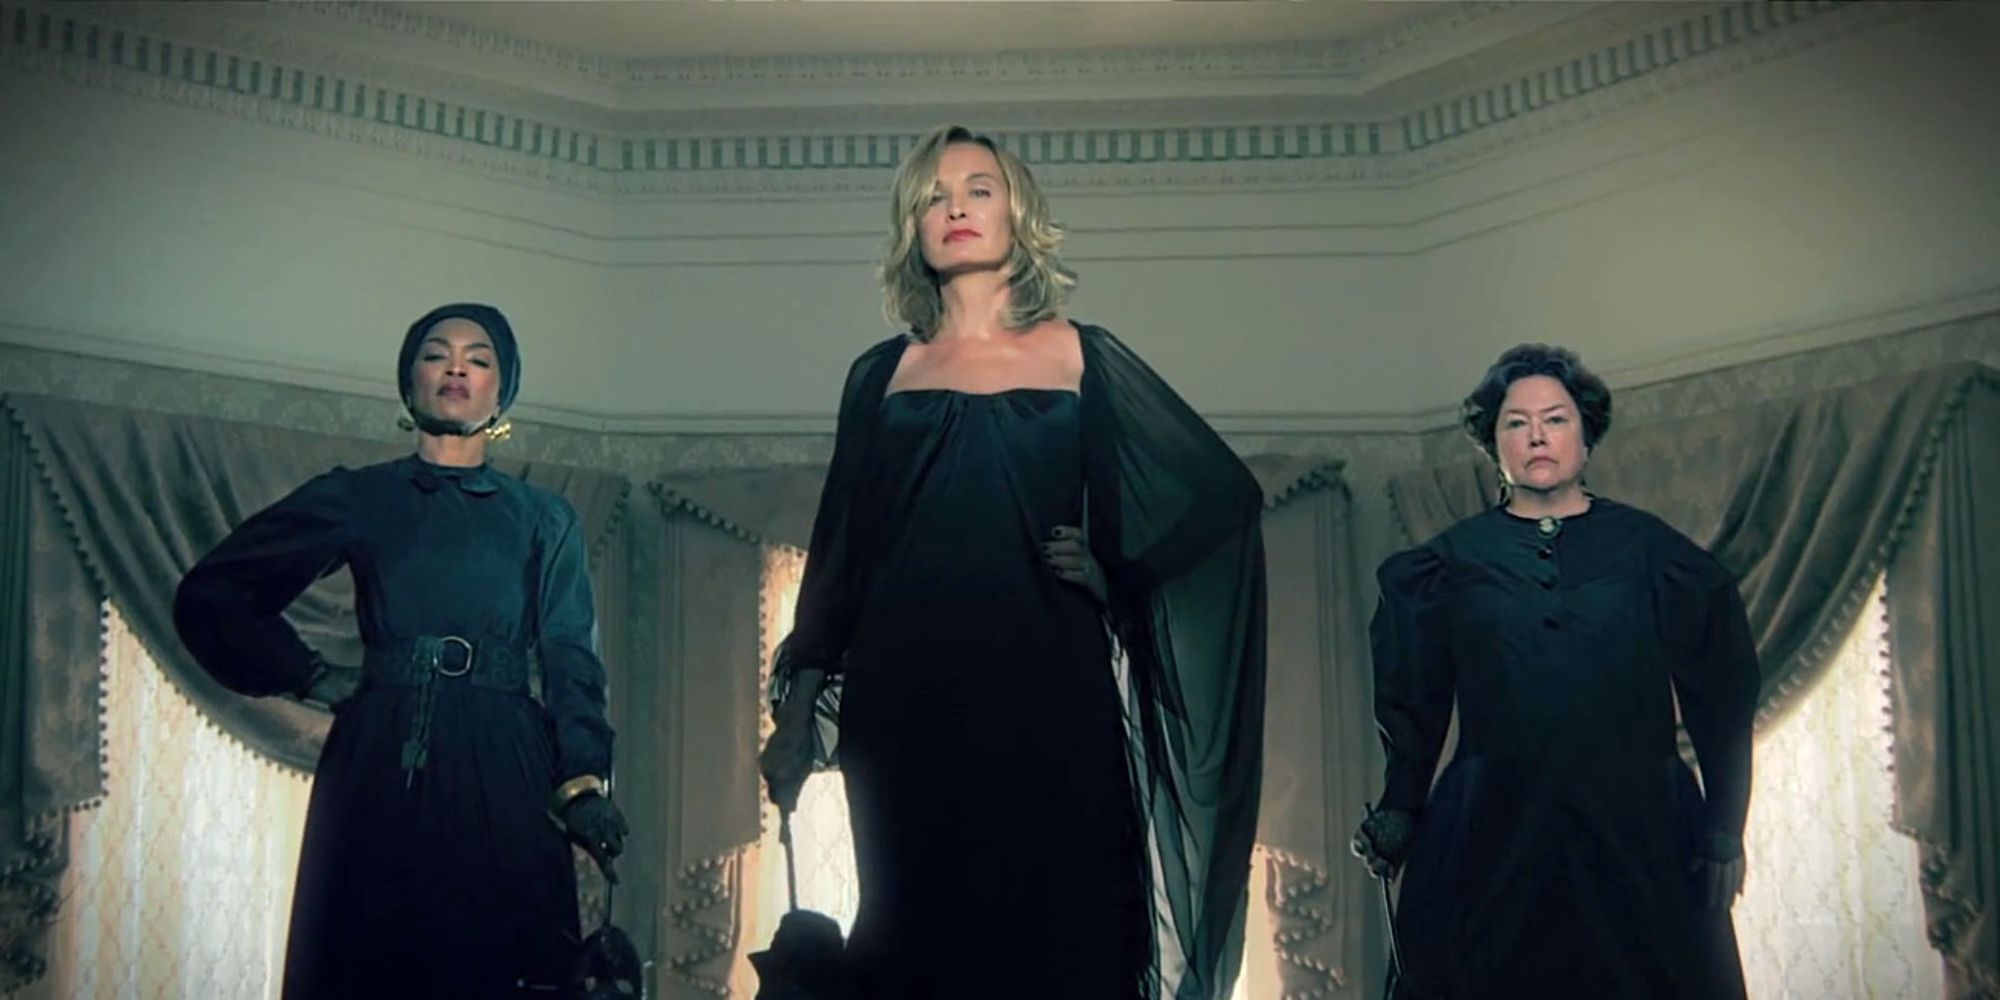 Angela Bassett, Jessica Lange and Kathy Bates from AHS Coven